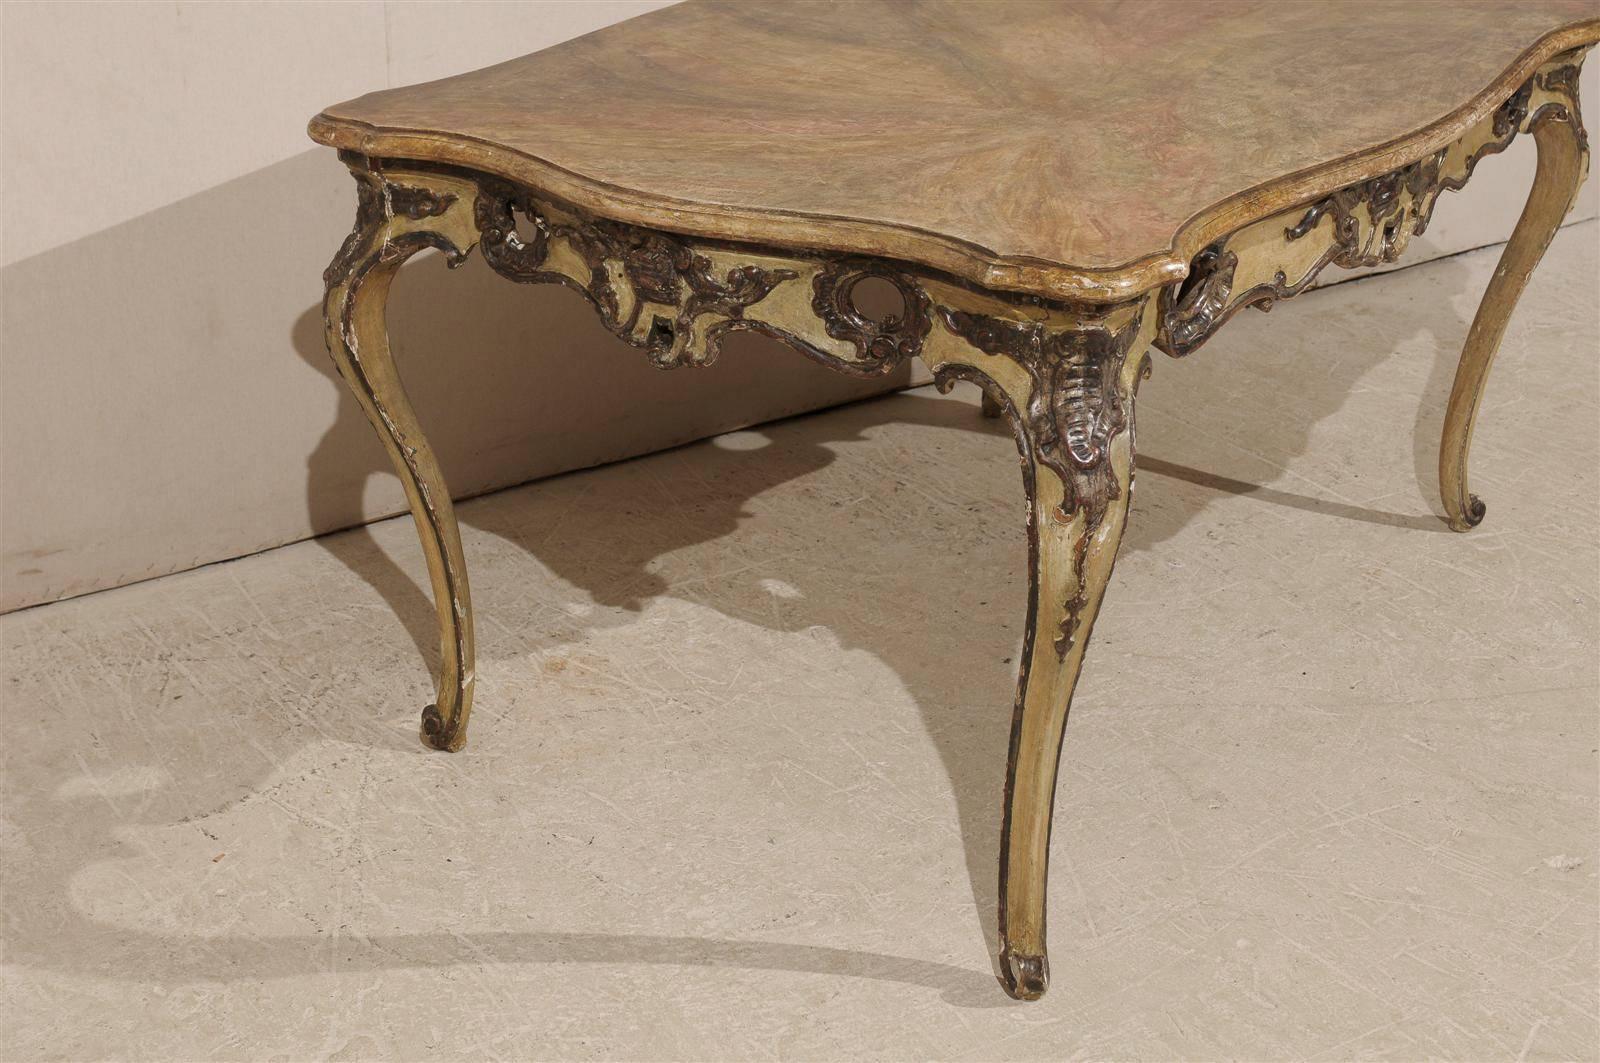 Italian Rococo Style Table, Desk With Faux-Marble Top, 19th Century For Sale 3